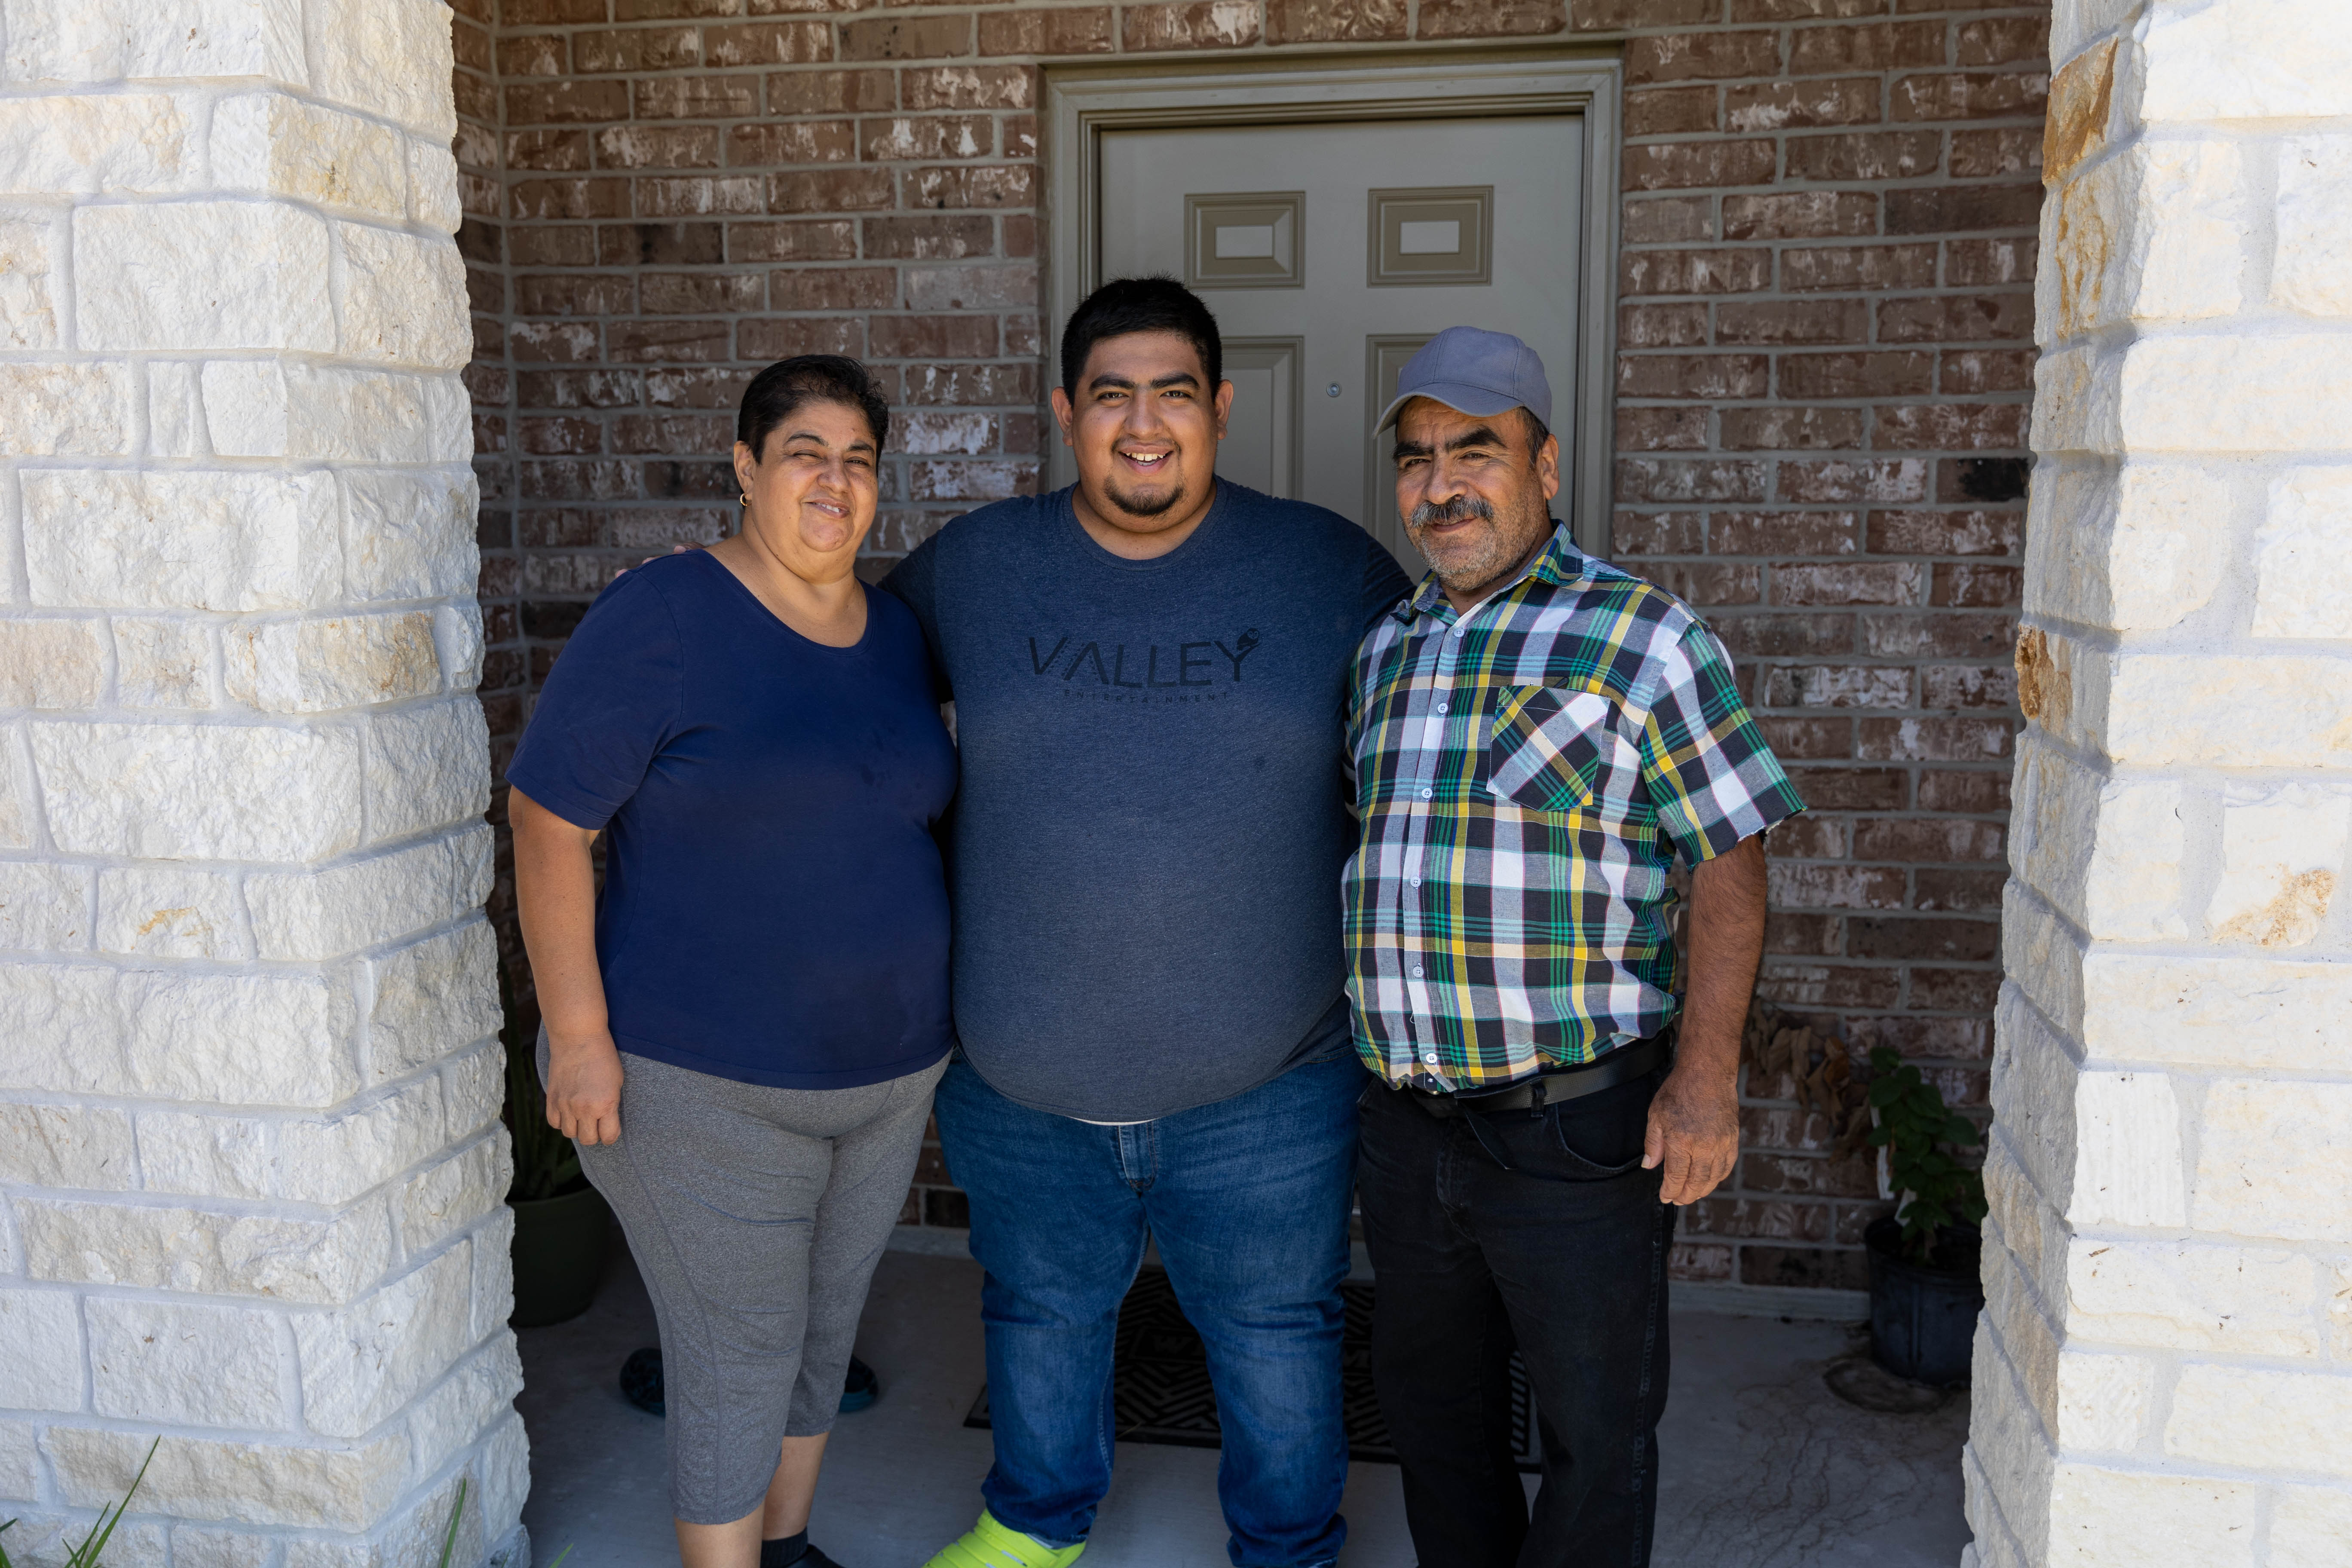 AHSTI helped Mr. Guardado become a first-time homeowner